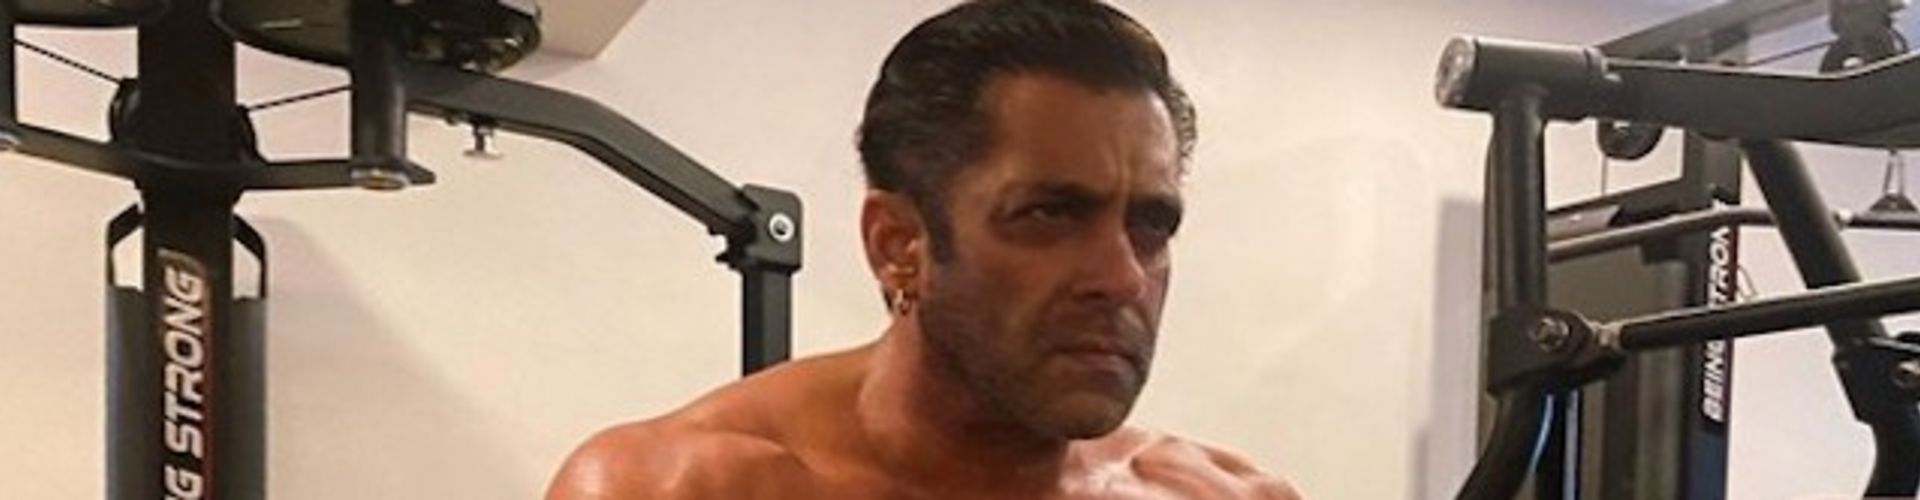 Being Strong Picture Of Salman Khan Goes Viral